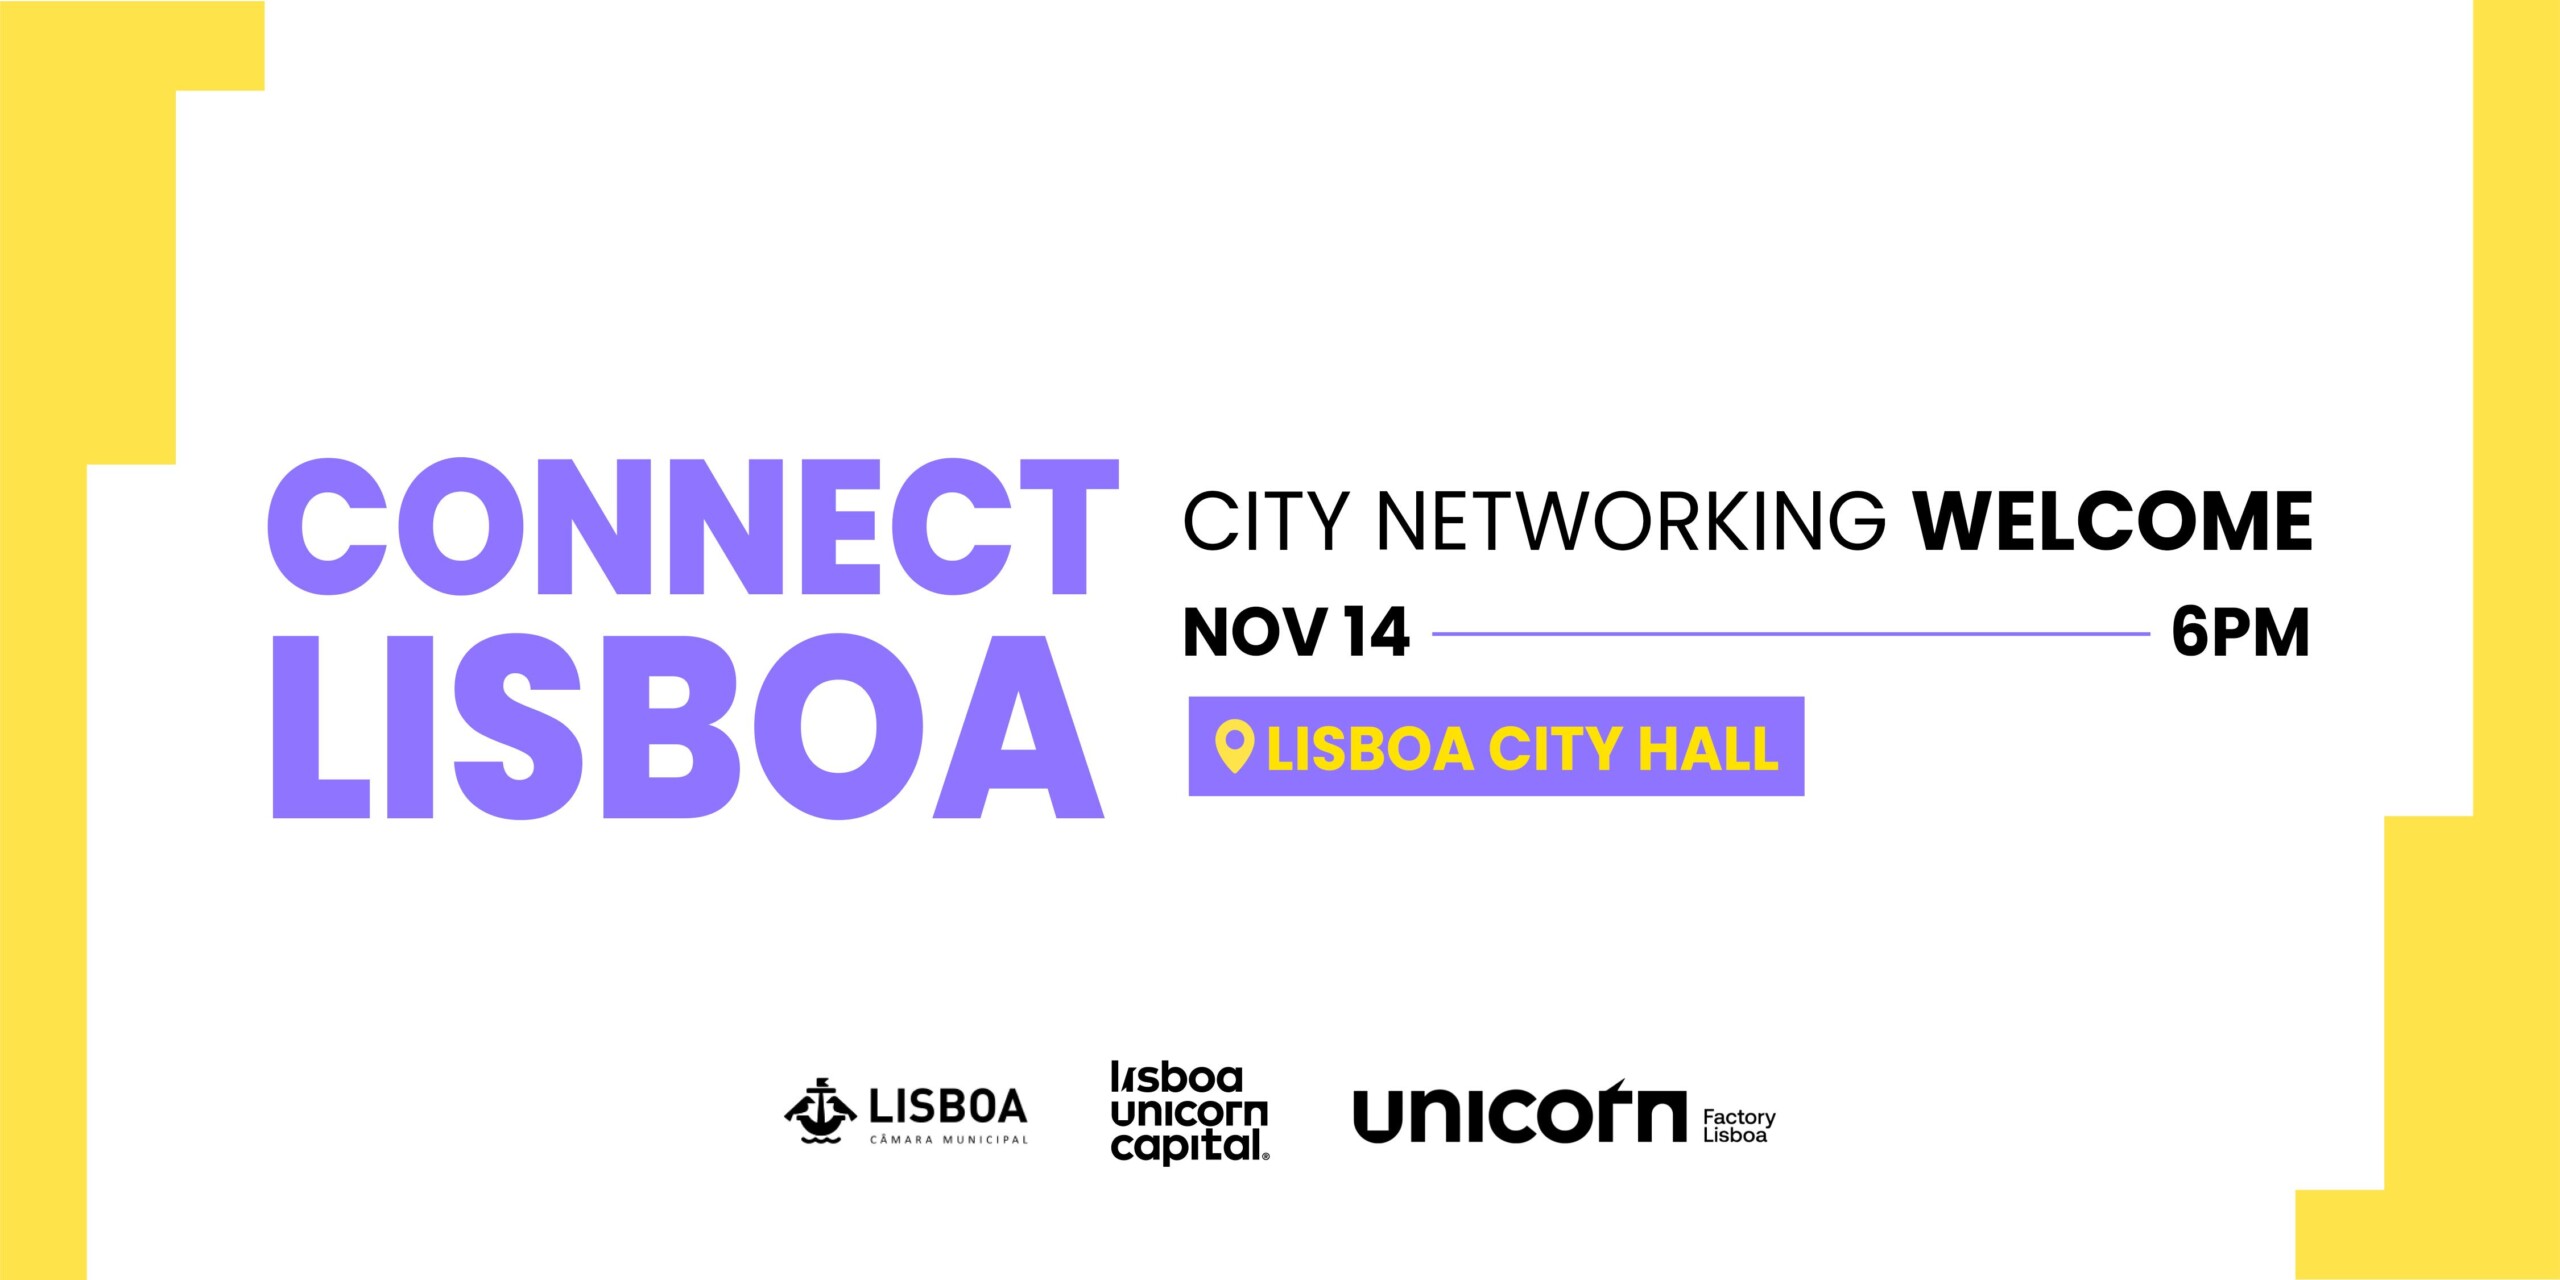 Connect Lisboa – City Networking Welcome